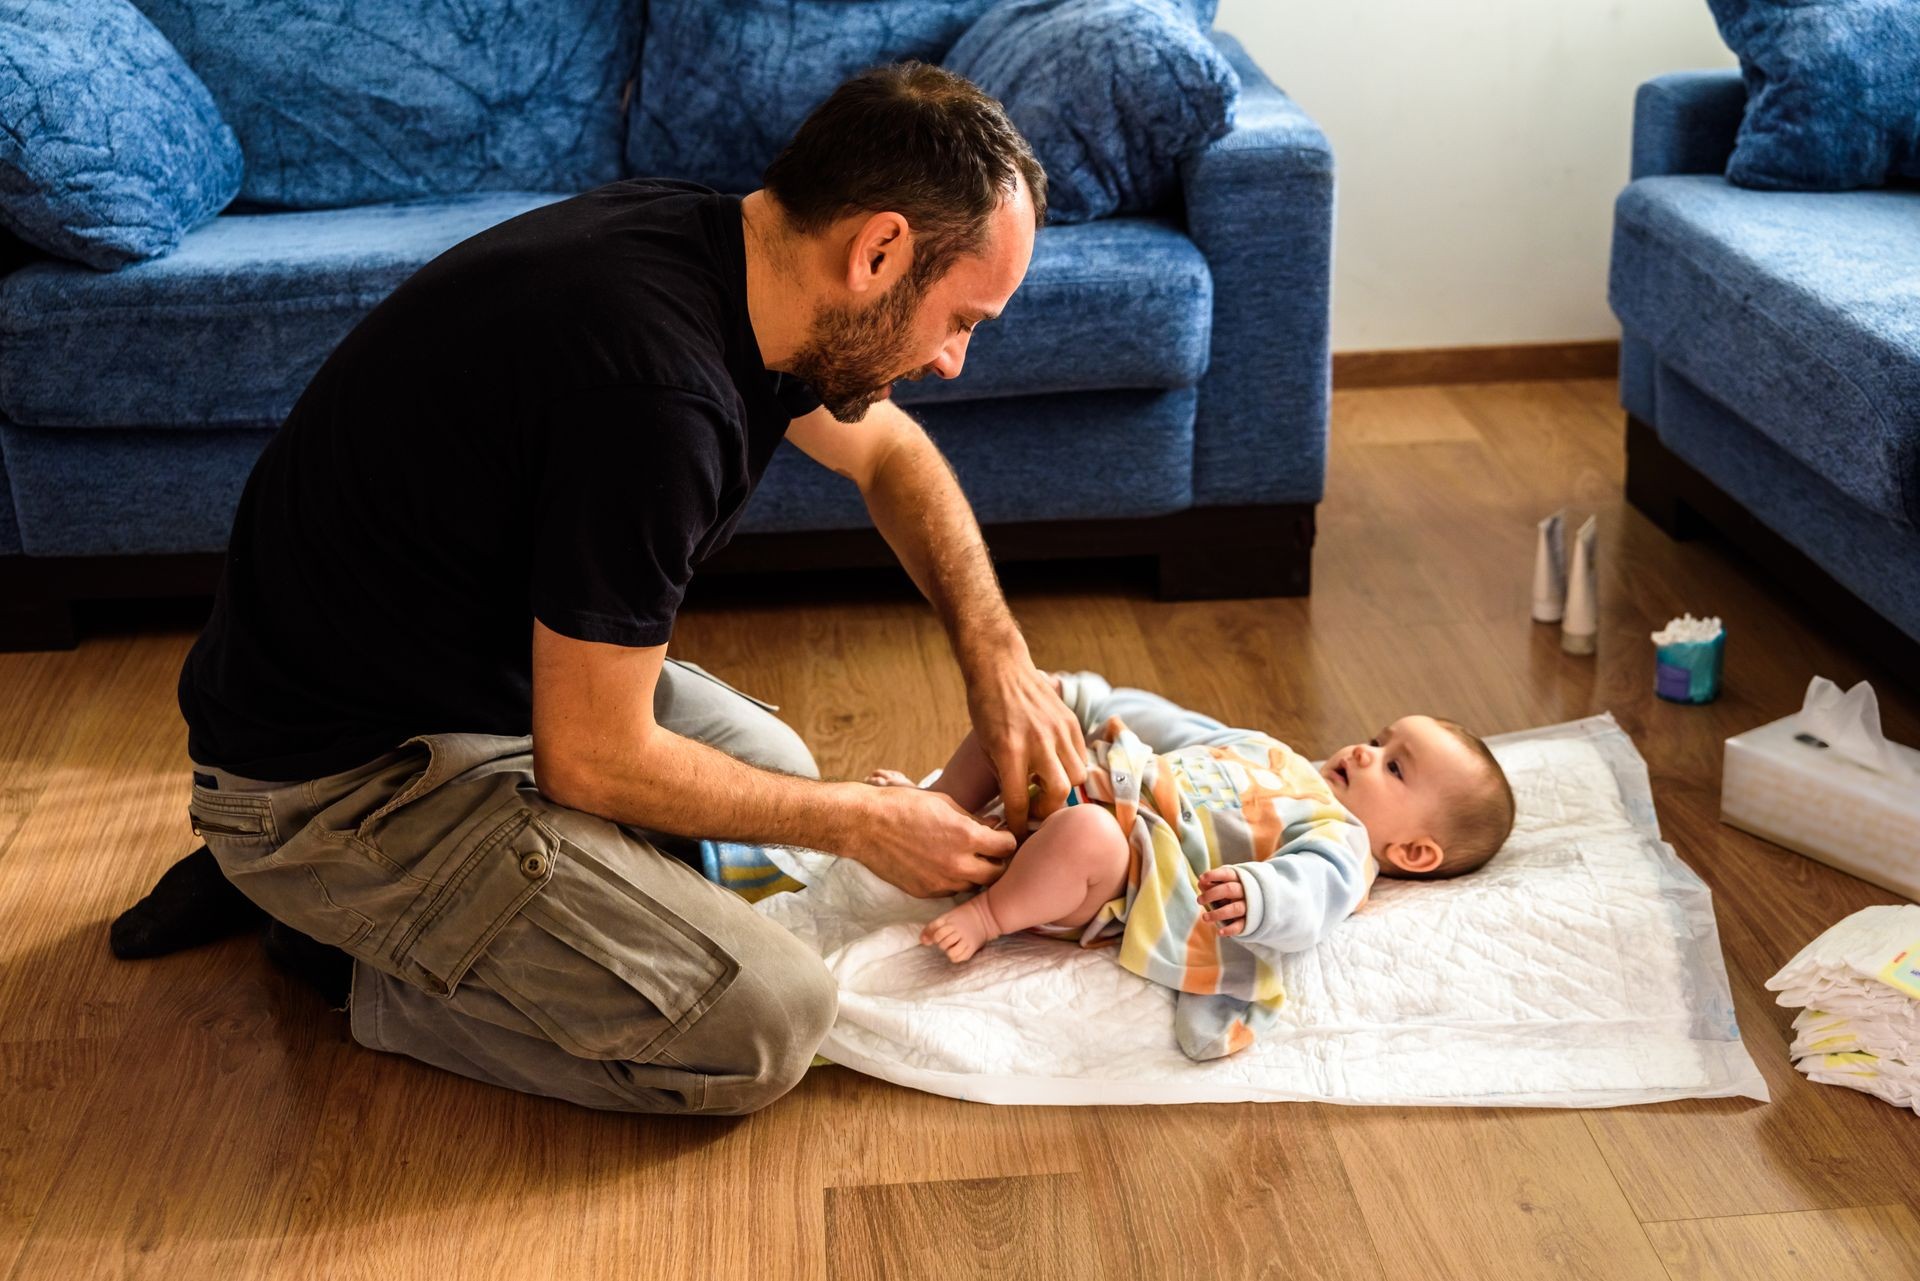 Father changing his daughter's dirty diaper on the living room floor.